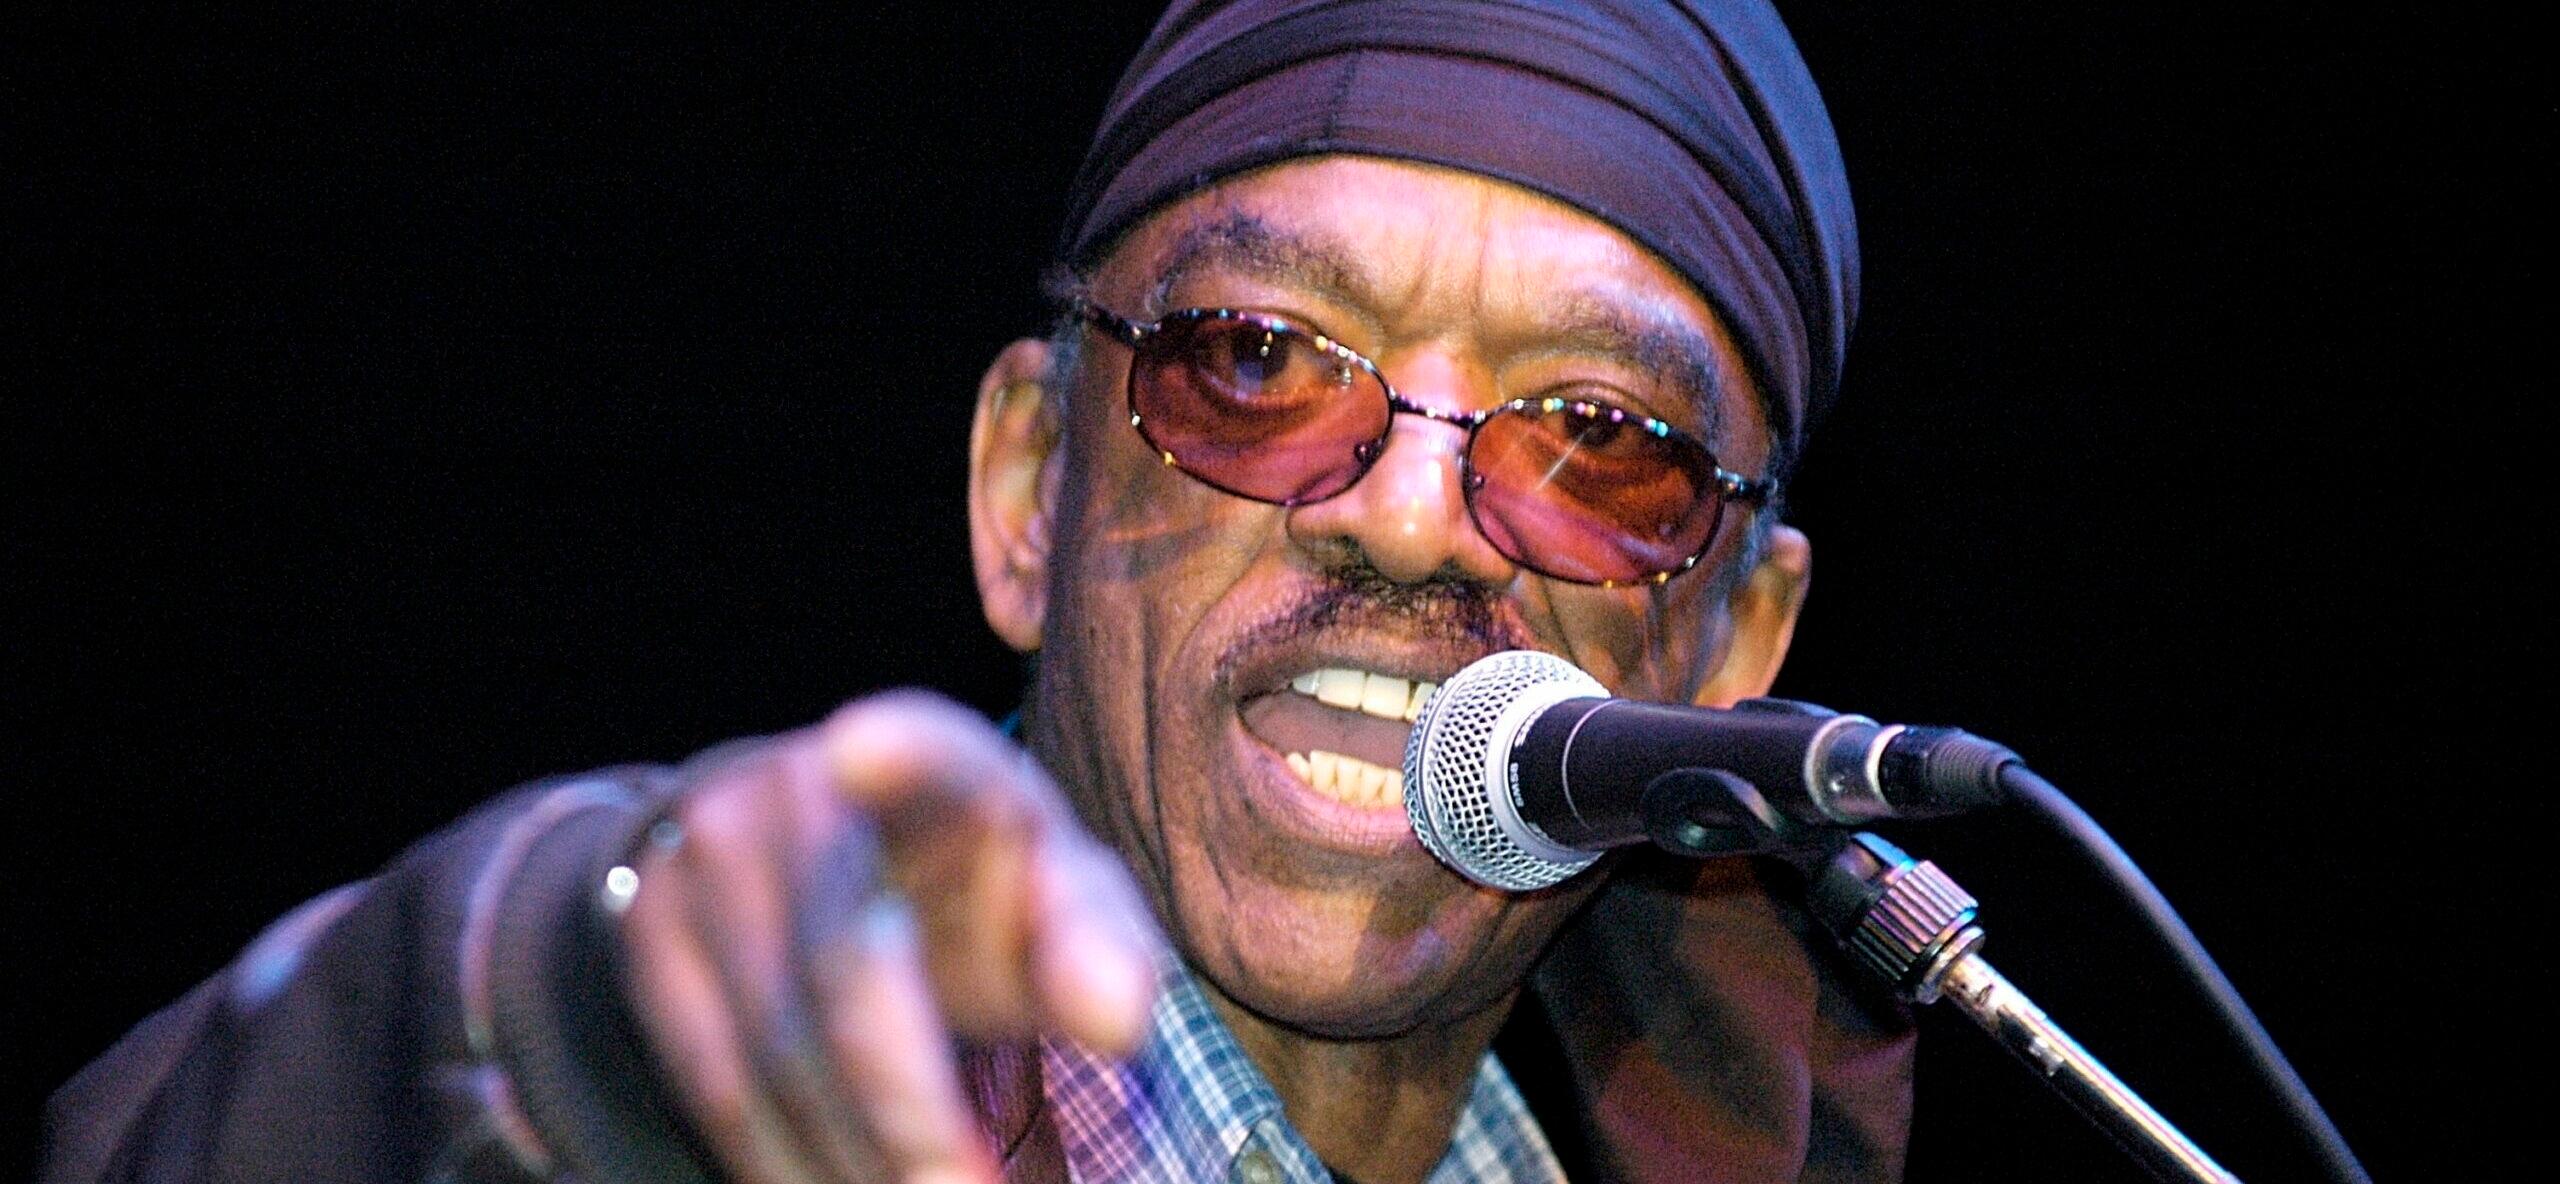 Syl Johnson performing with the Hi Band at the Barbican Centre, London on 22 Apr